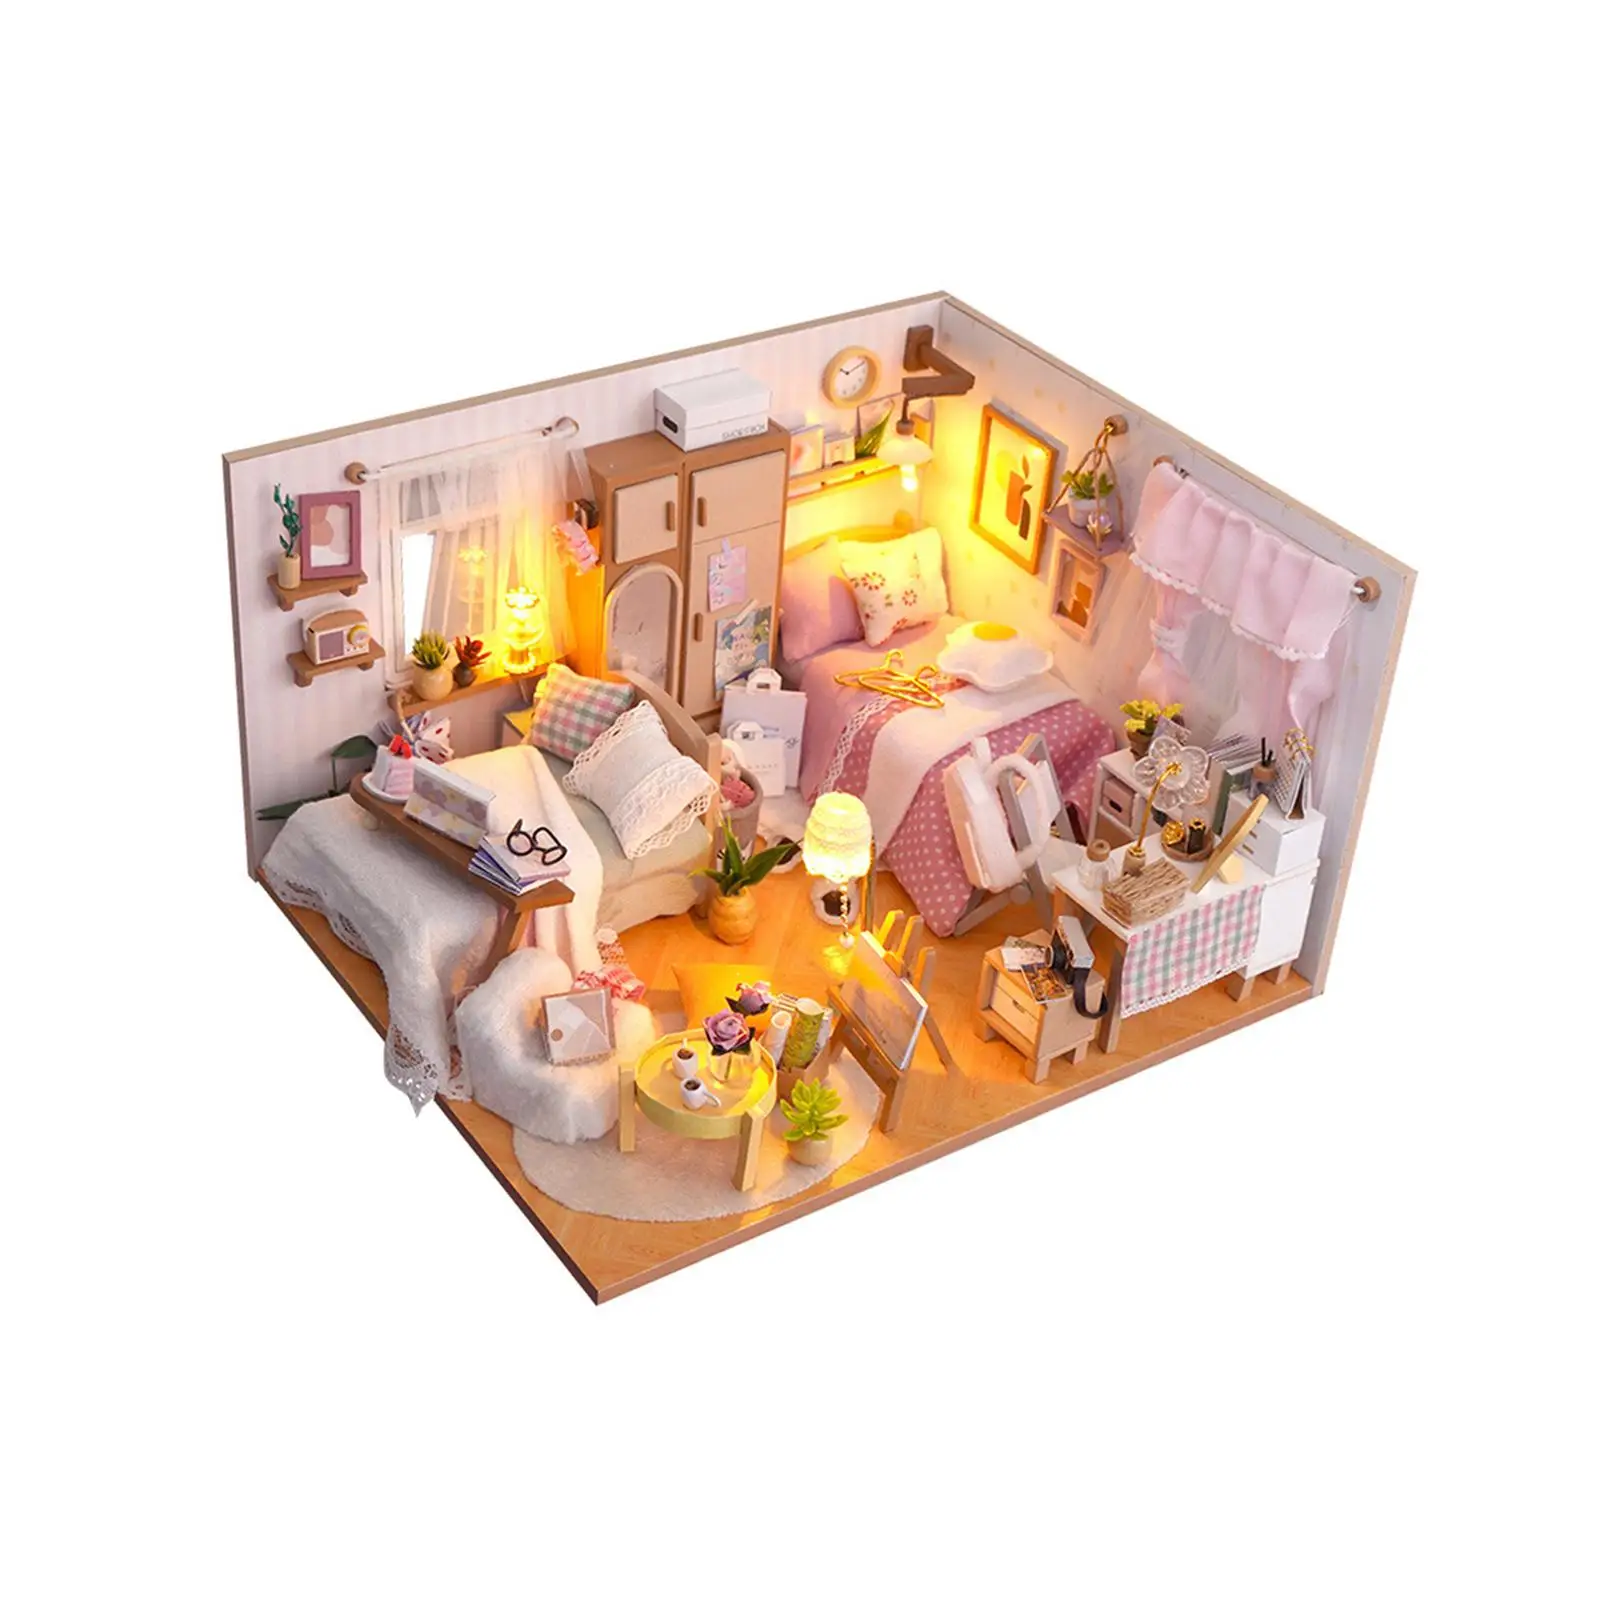 Wooden Miniature Dollhouse Kits Collectibles Birthday Gifts with Furniture Easy to Assemble for Kids Adults Doll House Model